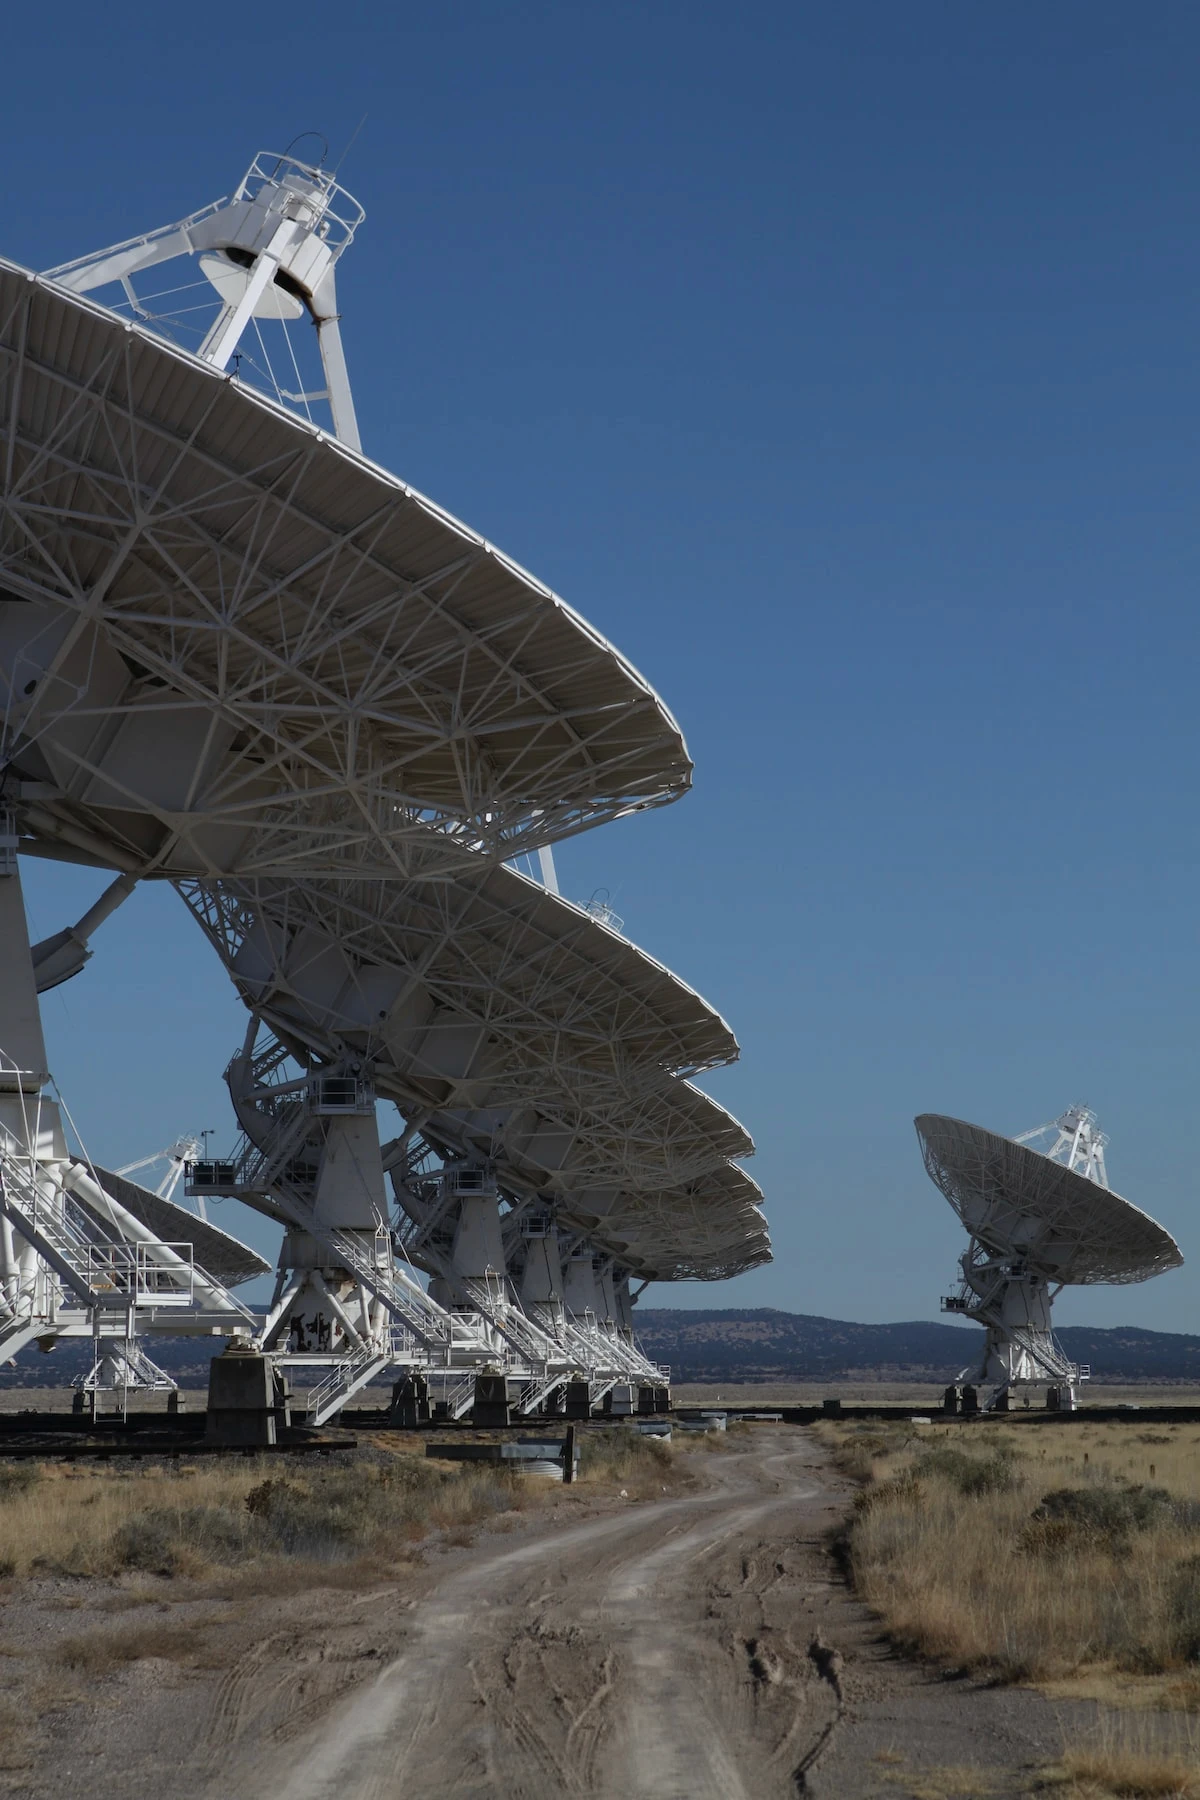 A row of large white radio telescopes pointing skyward, aligned on either side of a dirt road leading towards the horizon under a clear blue sky. The foreground shows dry grassland, while the background hints at a flat landscape with distant mountains.